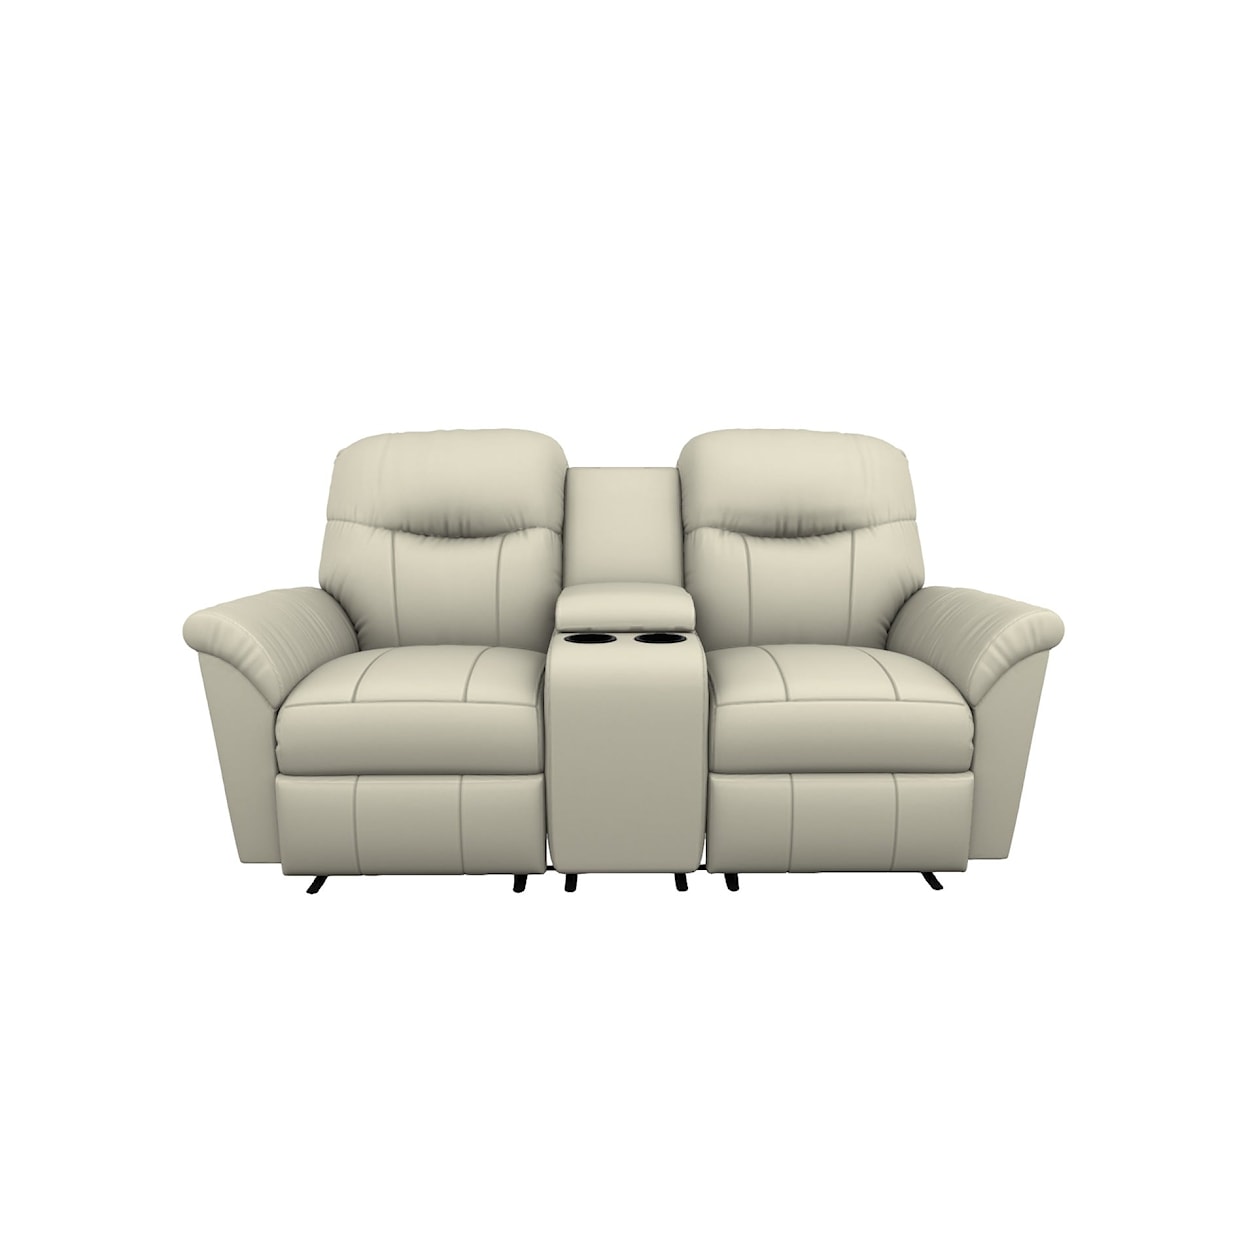 Best Home Furnishings Caitlin Power Rocking Reclining Console Loveseat